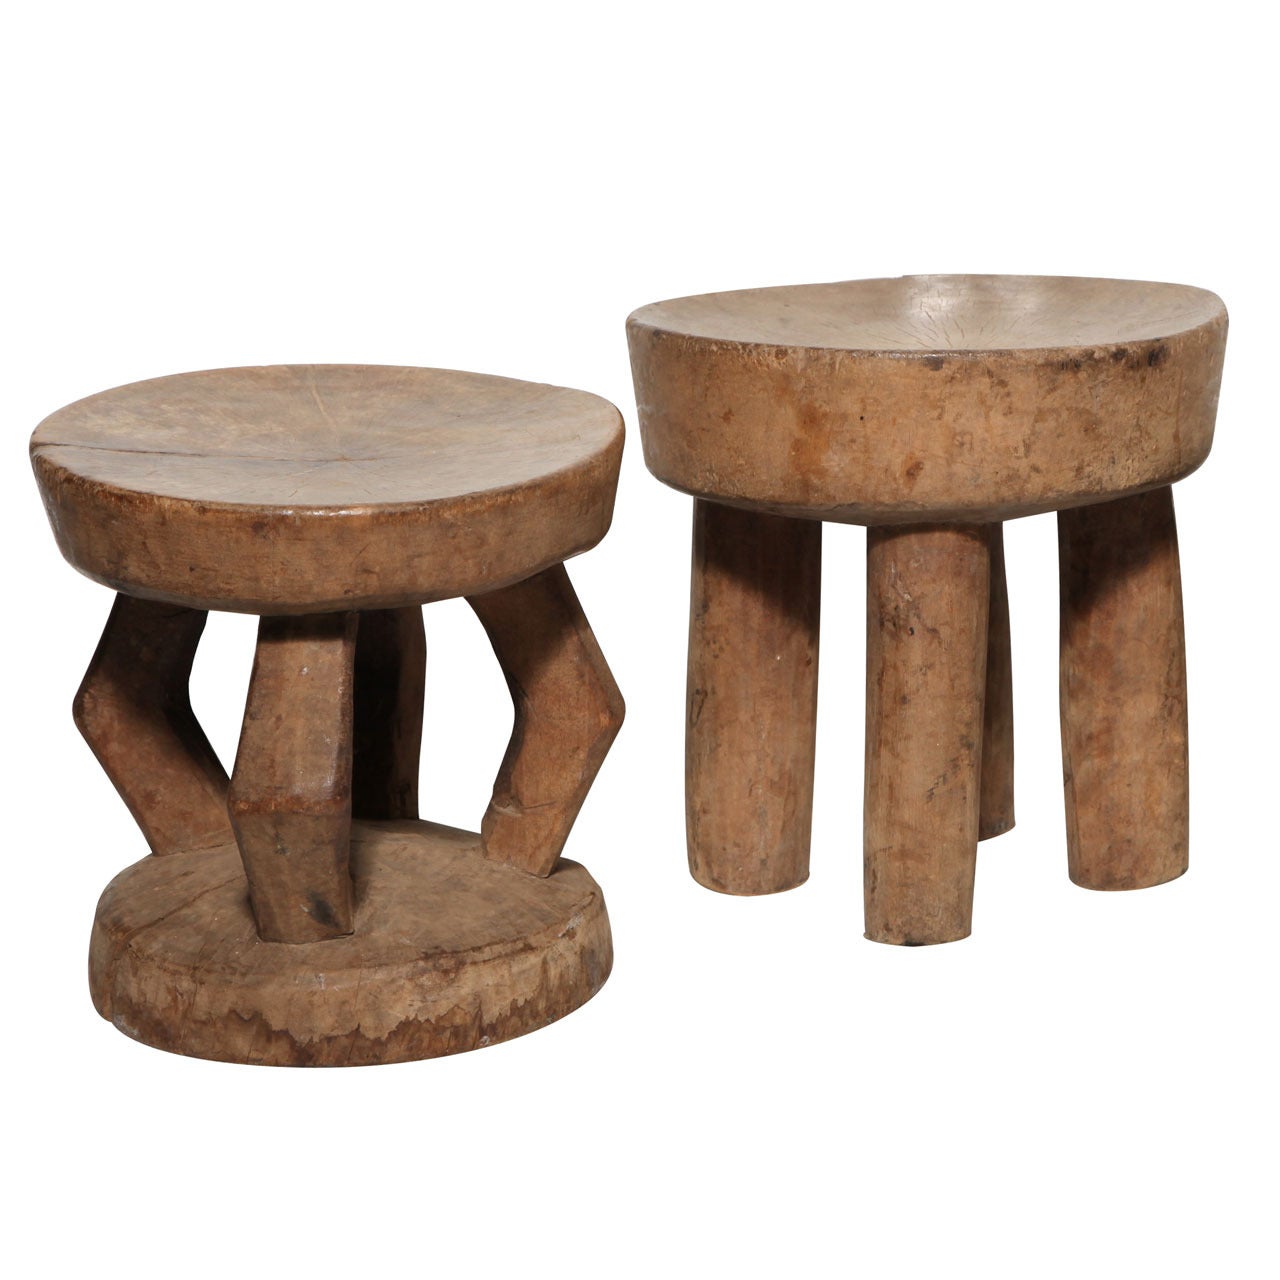 Selection of Small African Stools (Priced Individually)